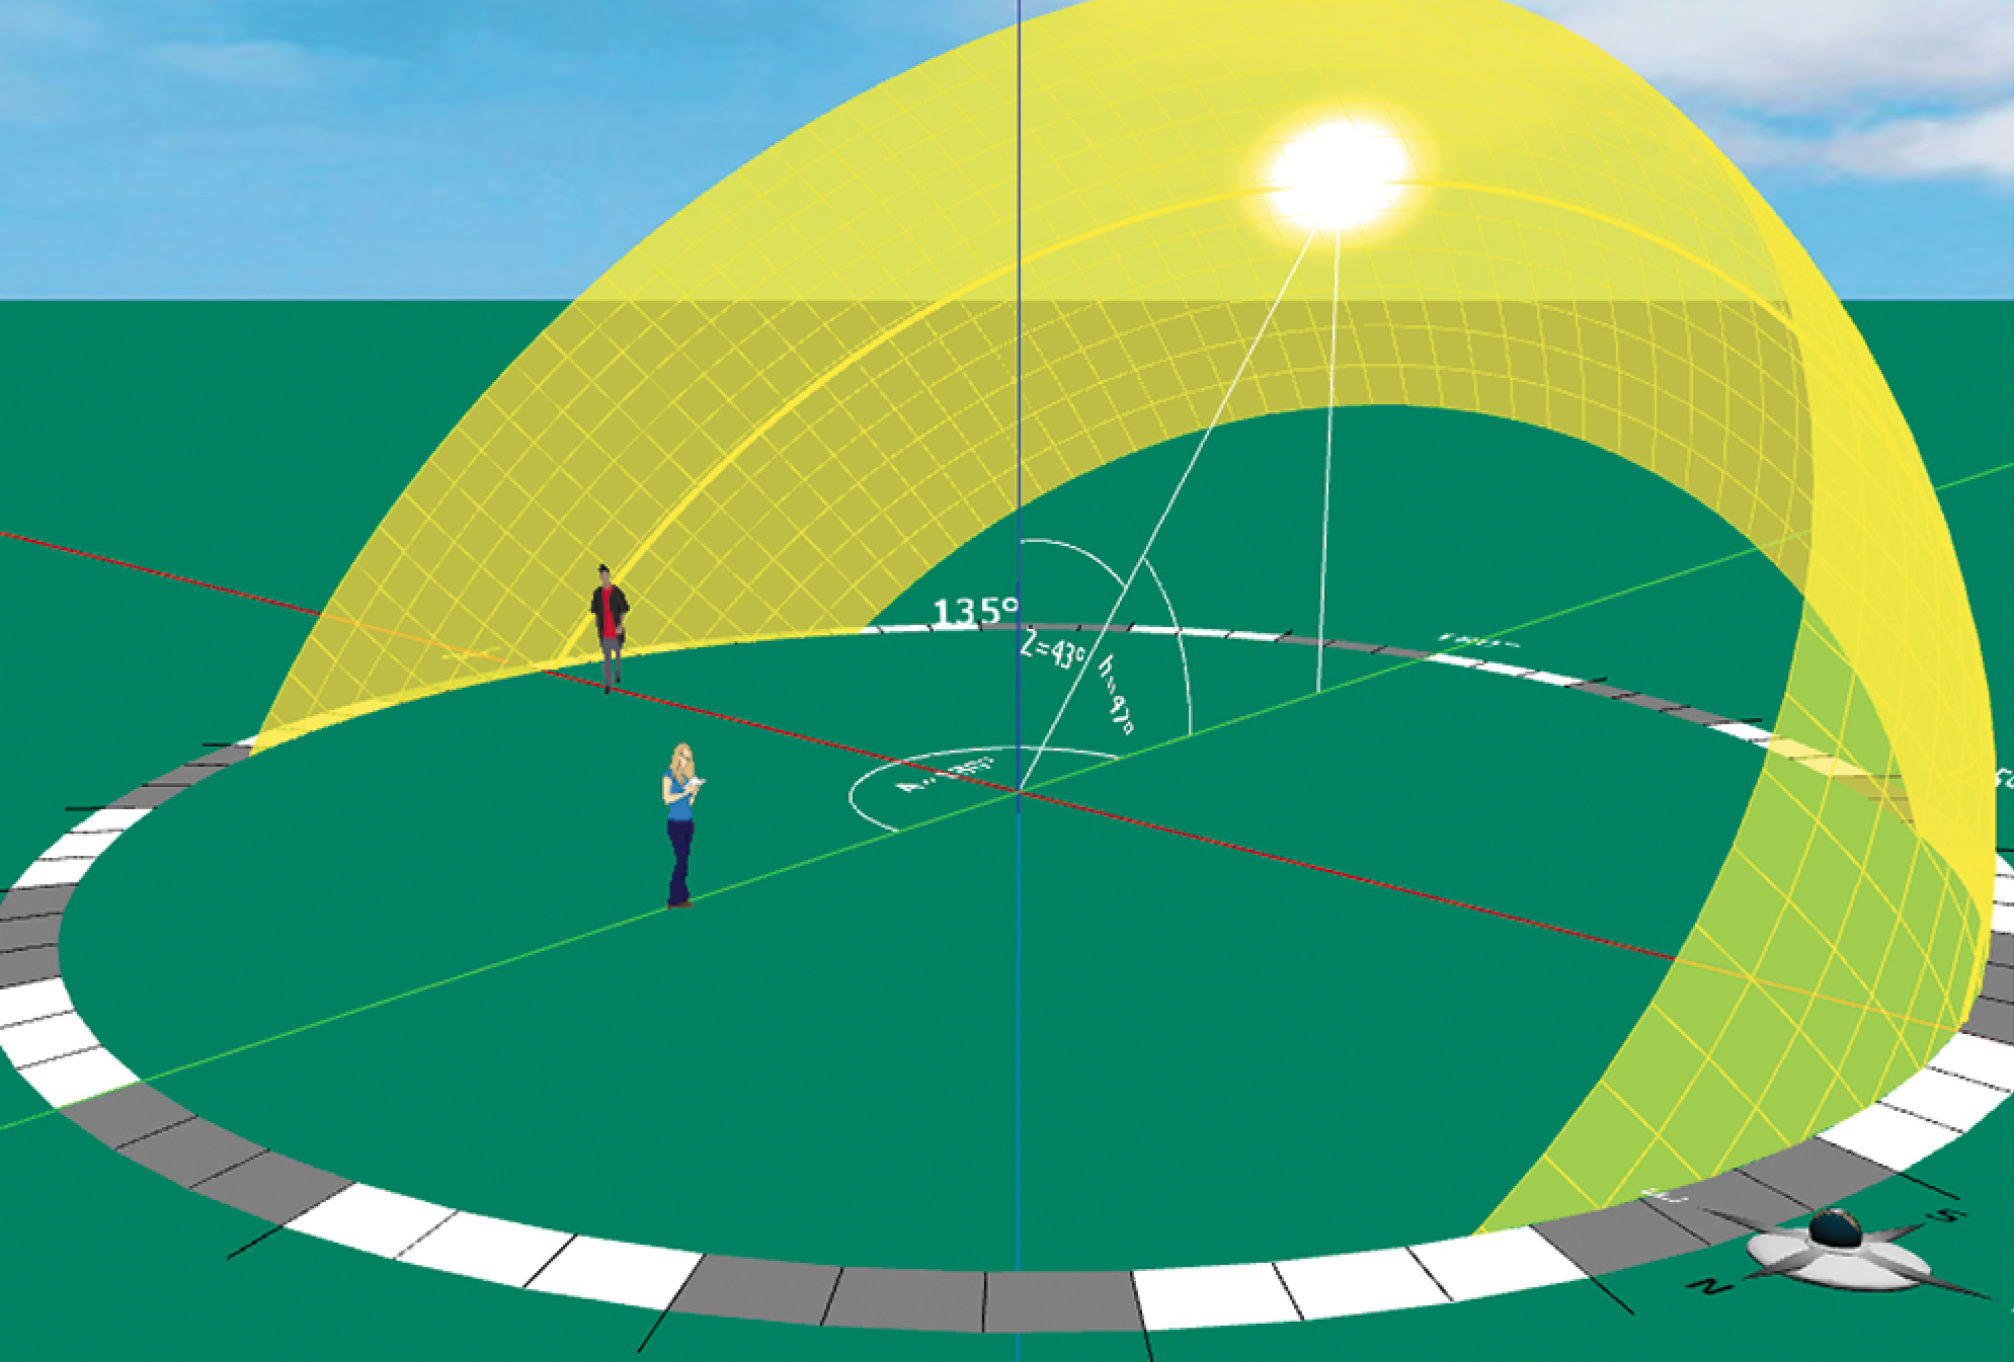 Figure 2 Using Aladdin to model the Sun’s location at noon on September 22nd in Boston, MA. Students can use a heliodon to explore the Sun’s path in the sky and the changing solar elevation angle at different times of the day and the seasons in a year. The direction of the Sun can be represented by three angles: zenith angle (Z), elevation angle (h), and azimuth angle (A). The zenith angle is the direction between the Sun and the direction perpendicular to the surface. The elevation angle is complementary t